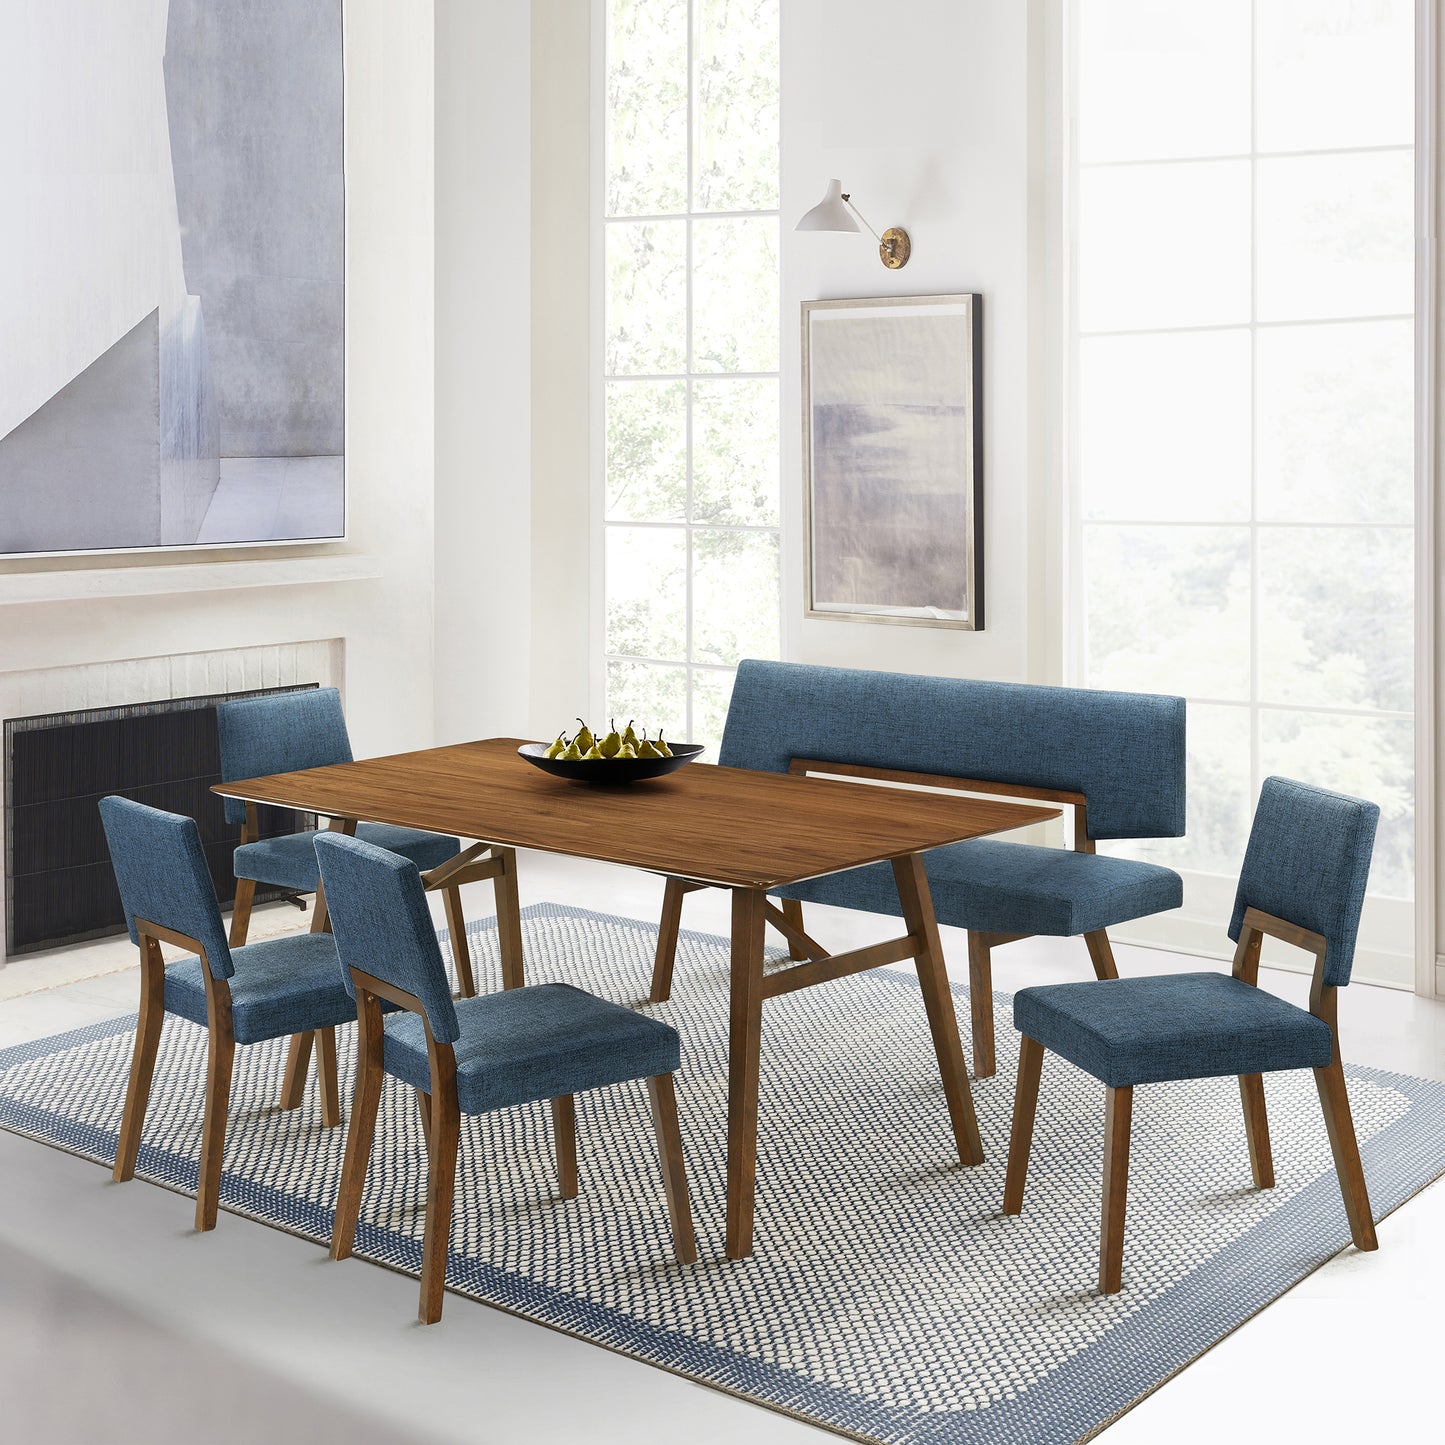 Channell 6 Piece Walnut Wood Dining Table Set with Bench in Blue Fabric